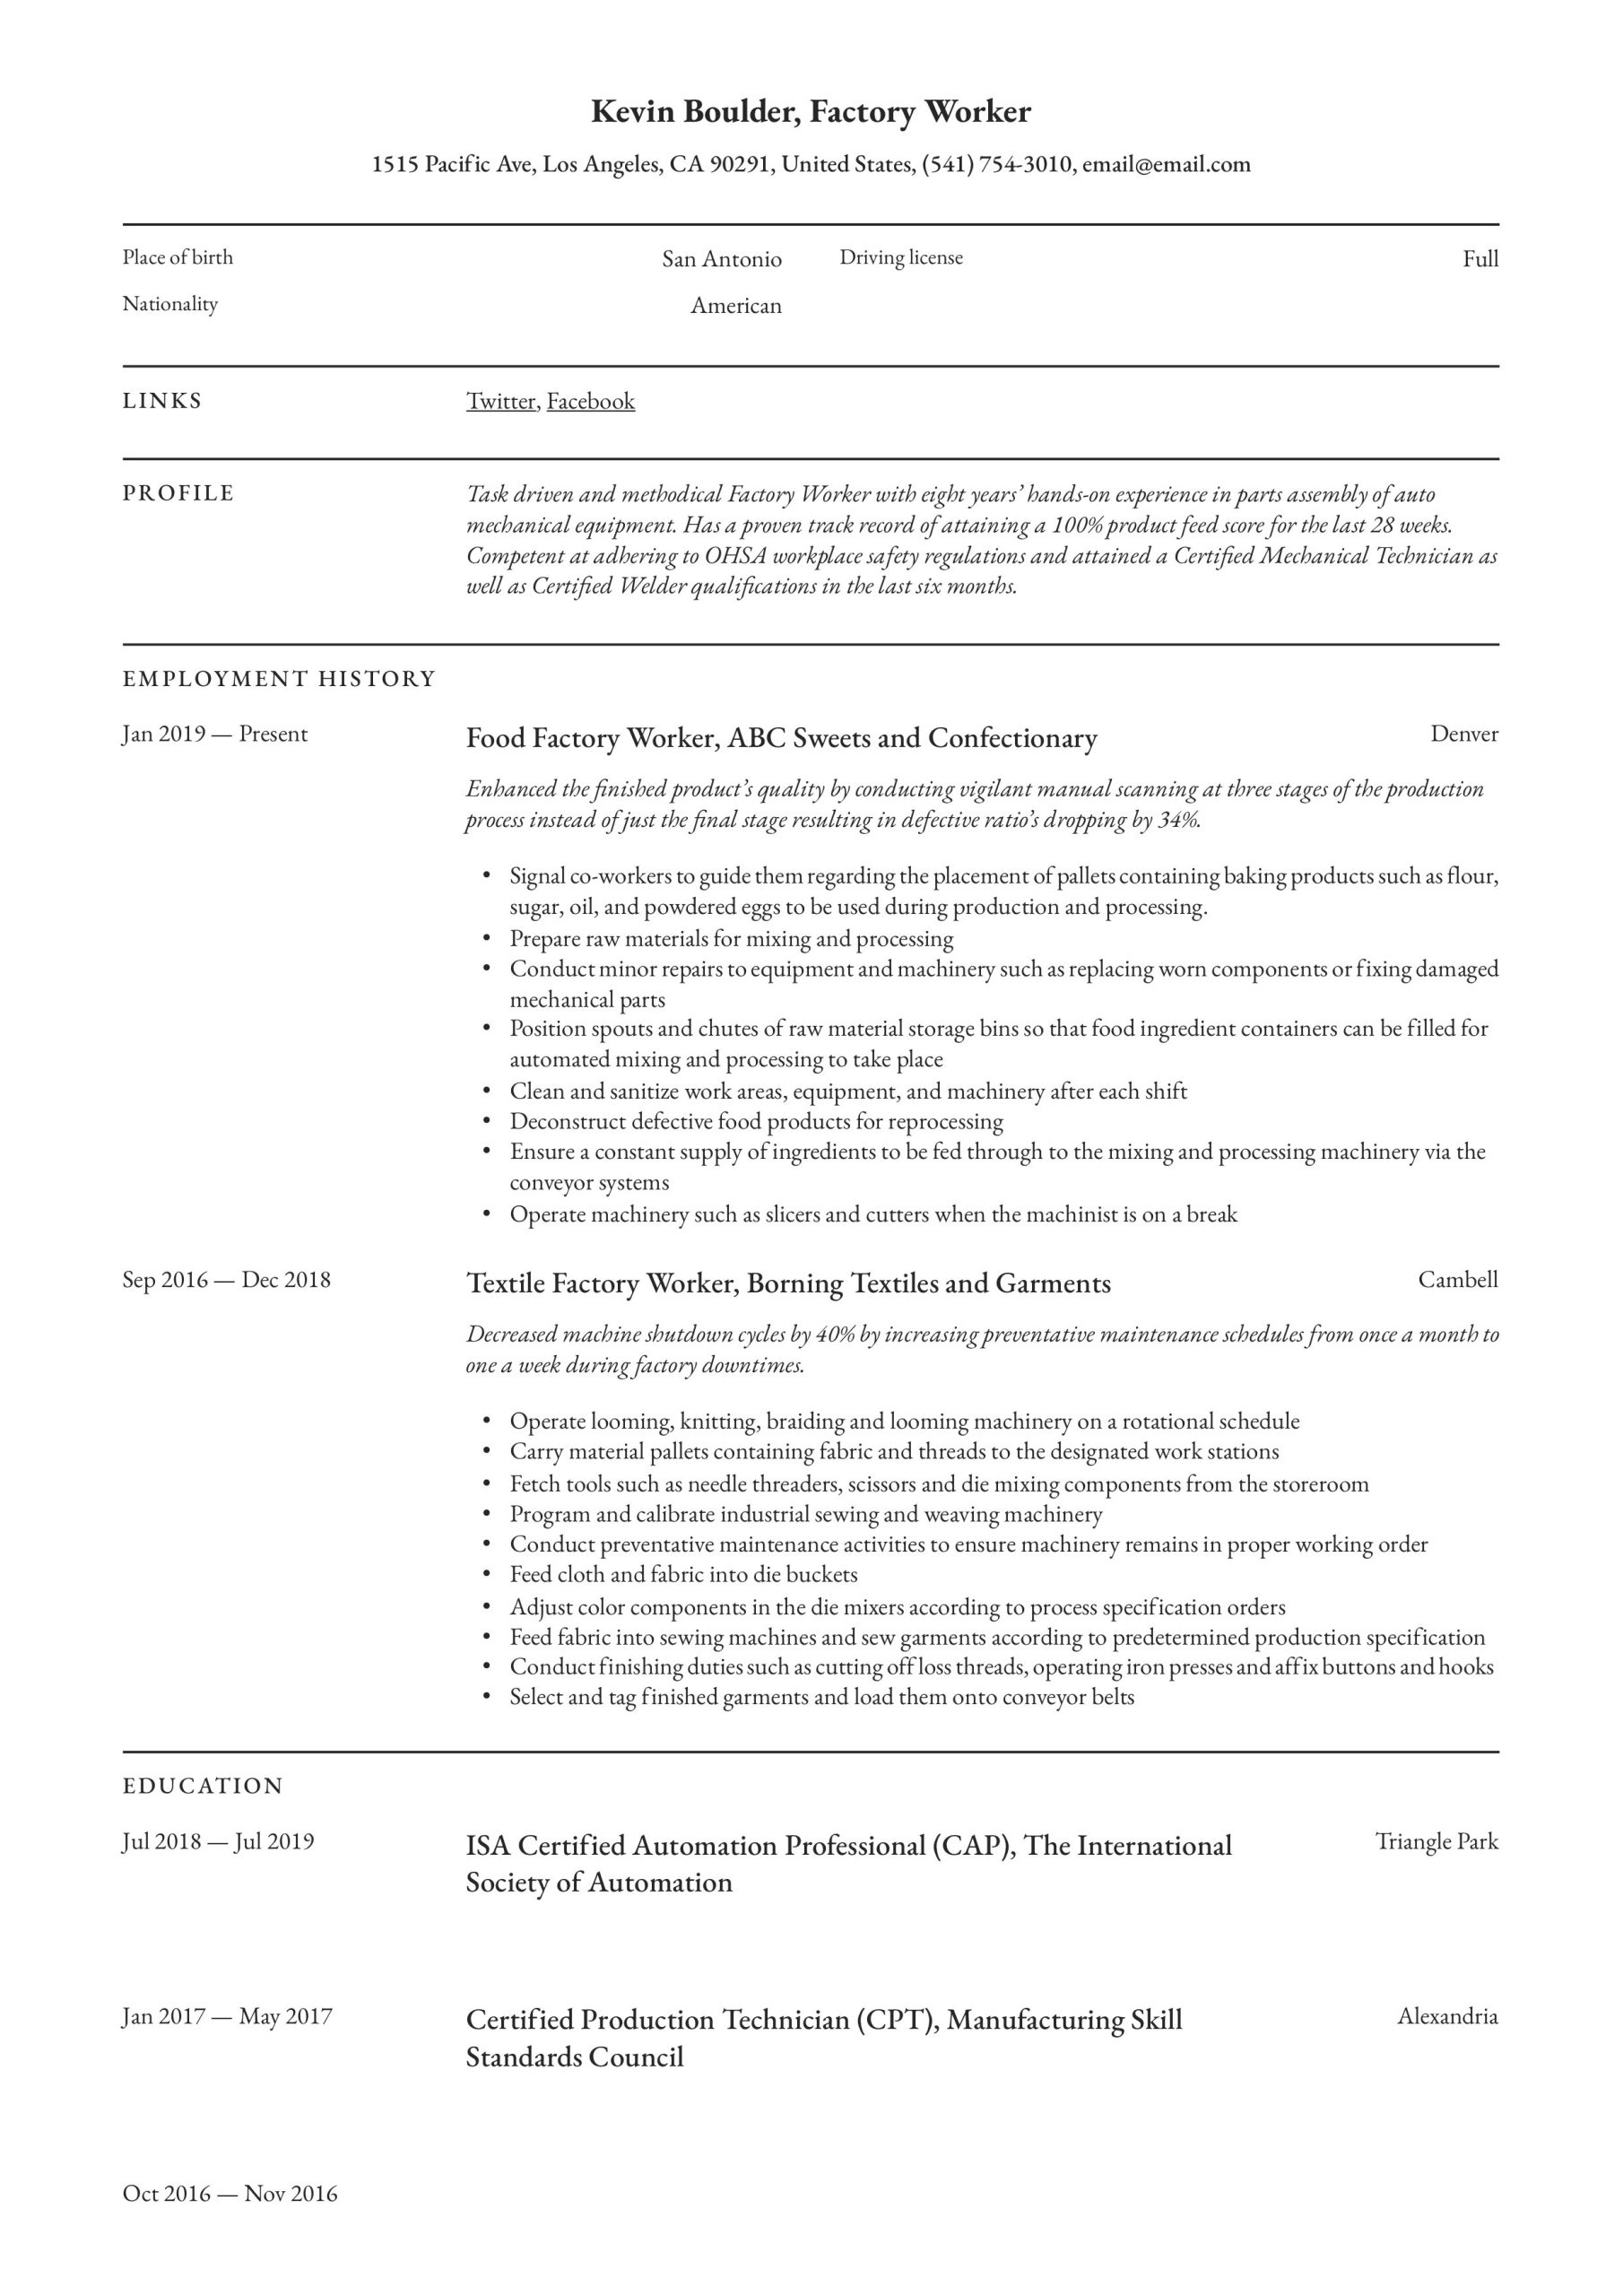 Sample Resume Objectives for Entry Level Manufacturing Factory Worker Resume & Writing Guide  12 Resume Examples 2022